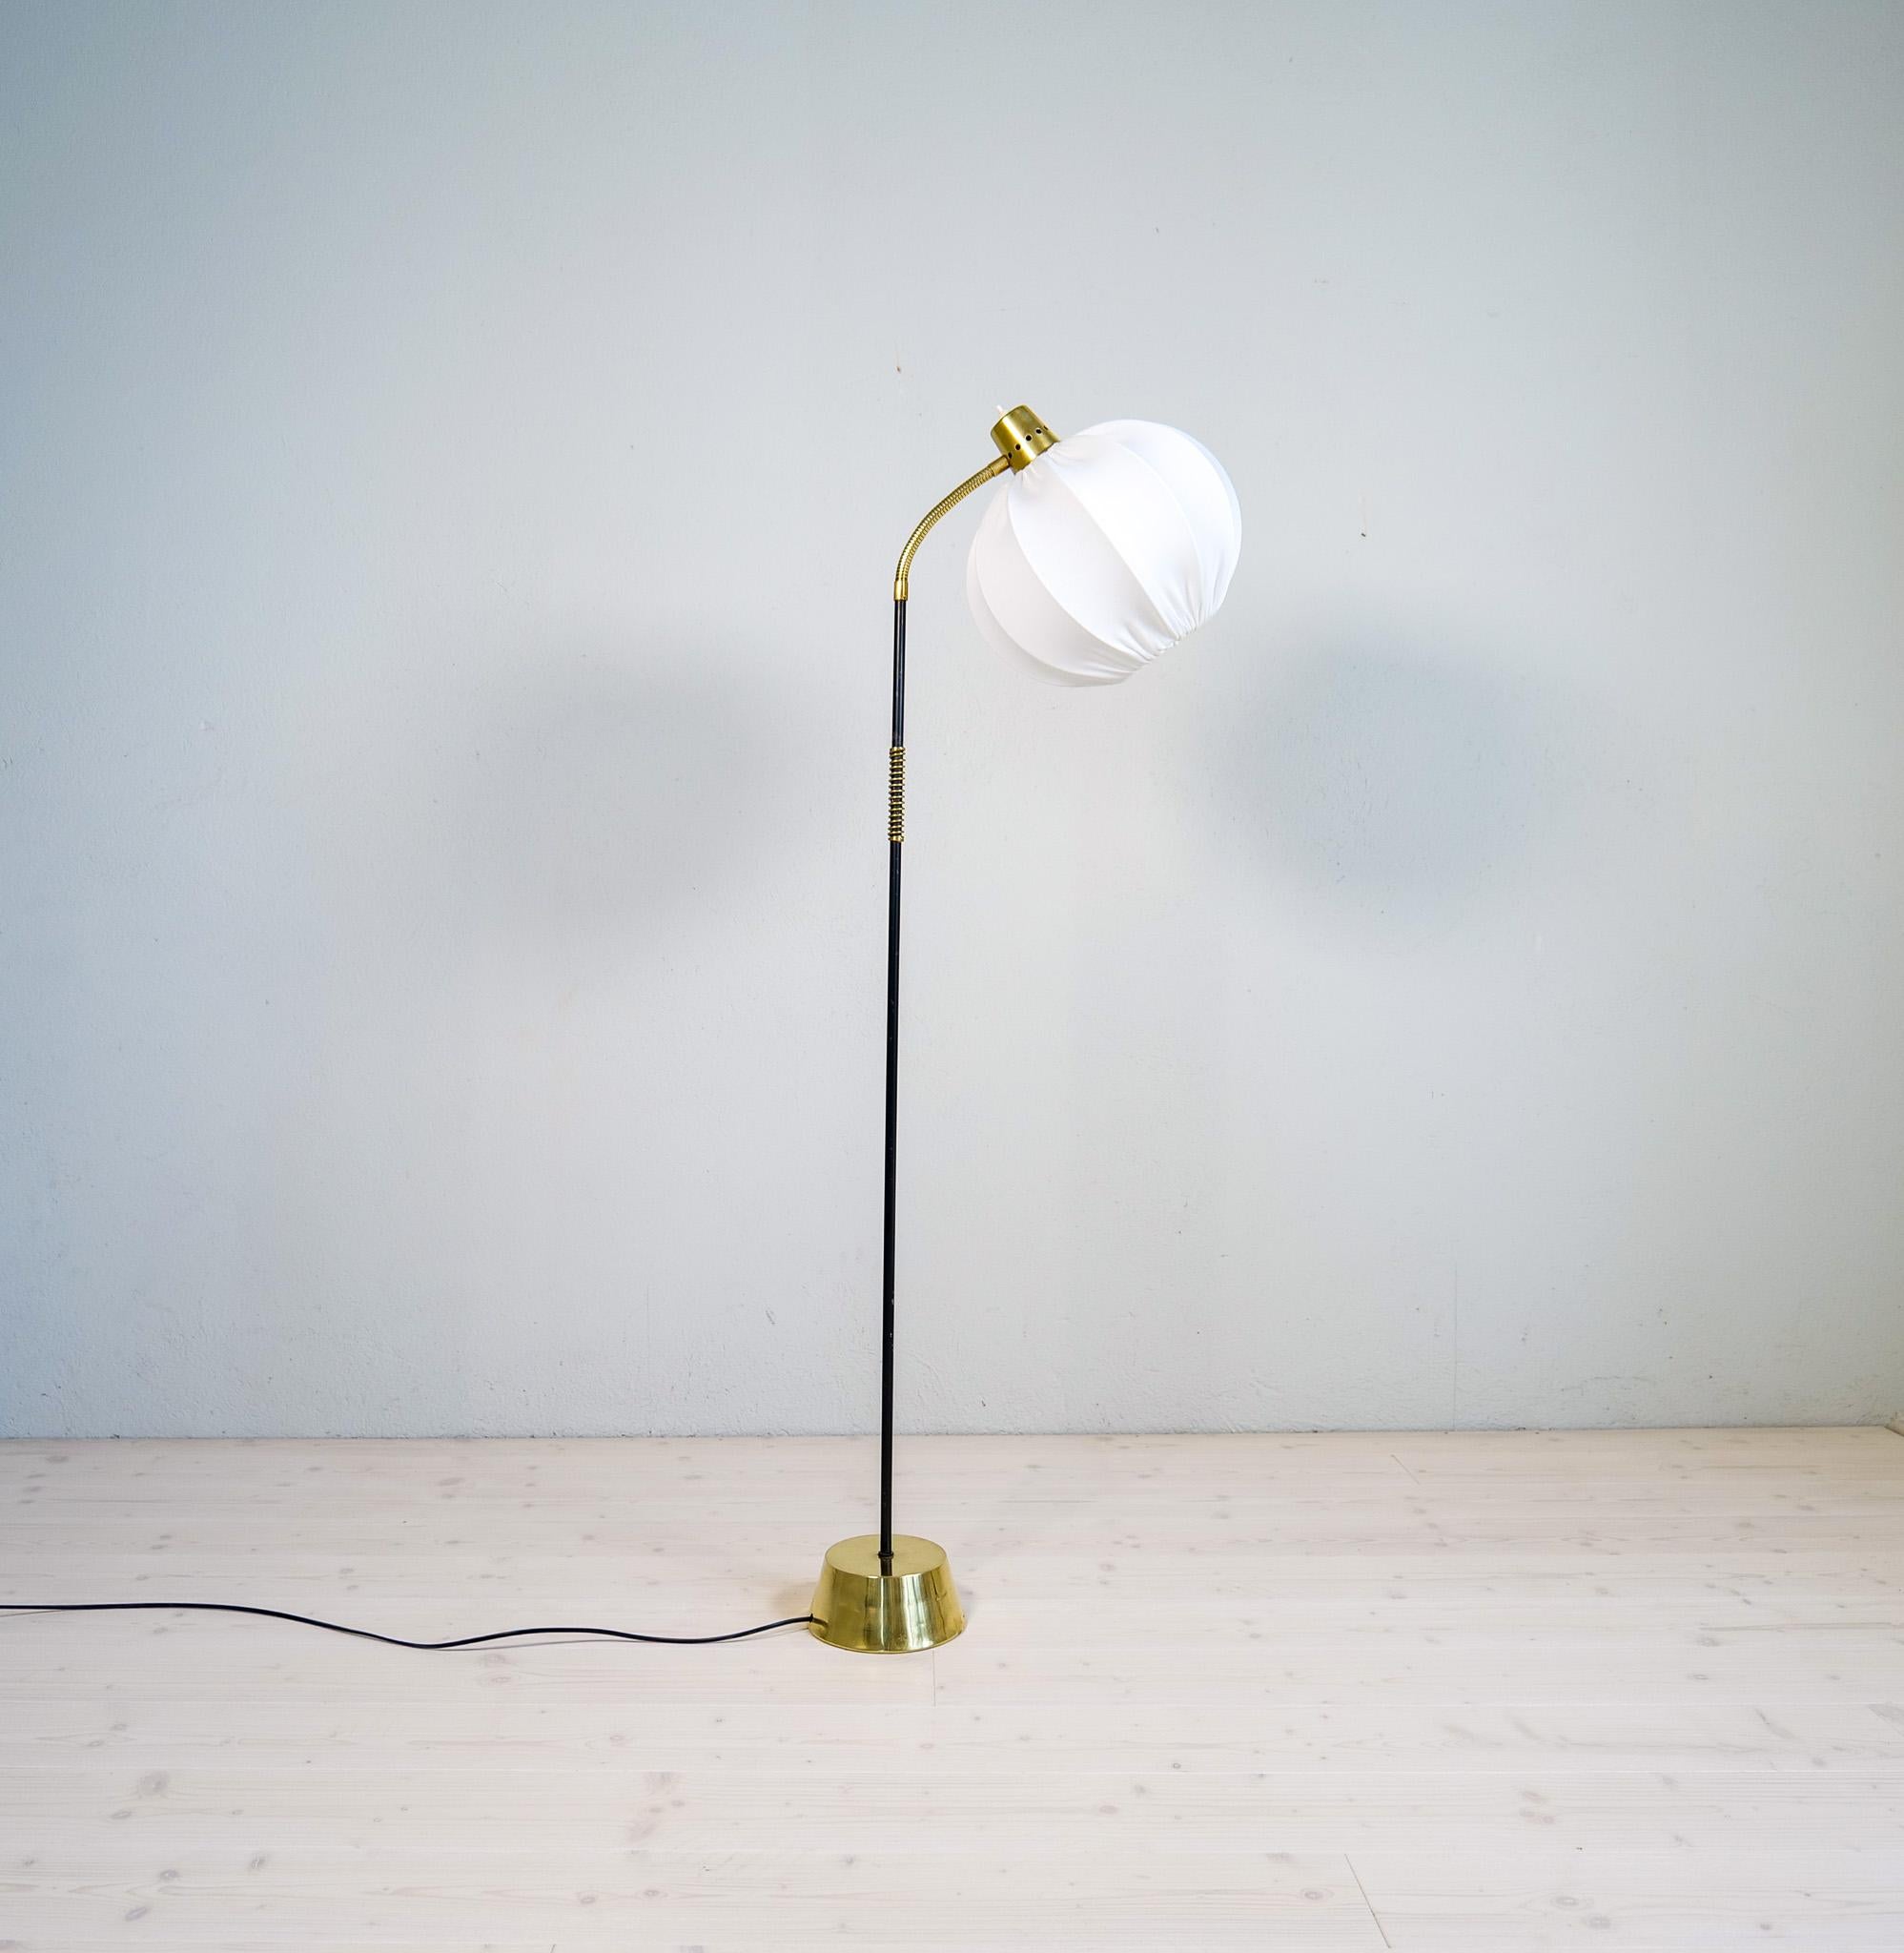 A gorgeous floor lamp made in brass and metal with a rounded cotton shade. Produced for ASEA this wonderful lamp was most likely designed by Hans Bergström.

Good working condition with losses to the paint on the rod. The shade made in cotton is